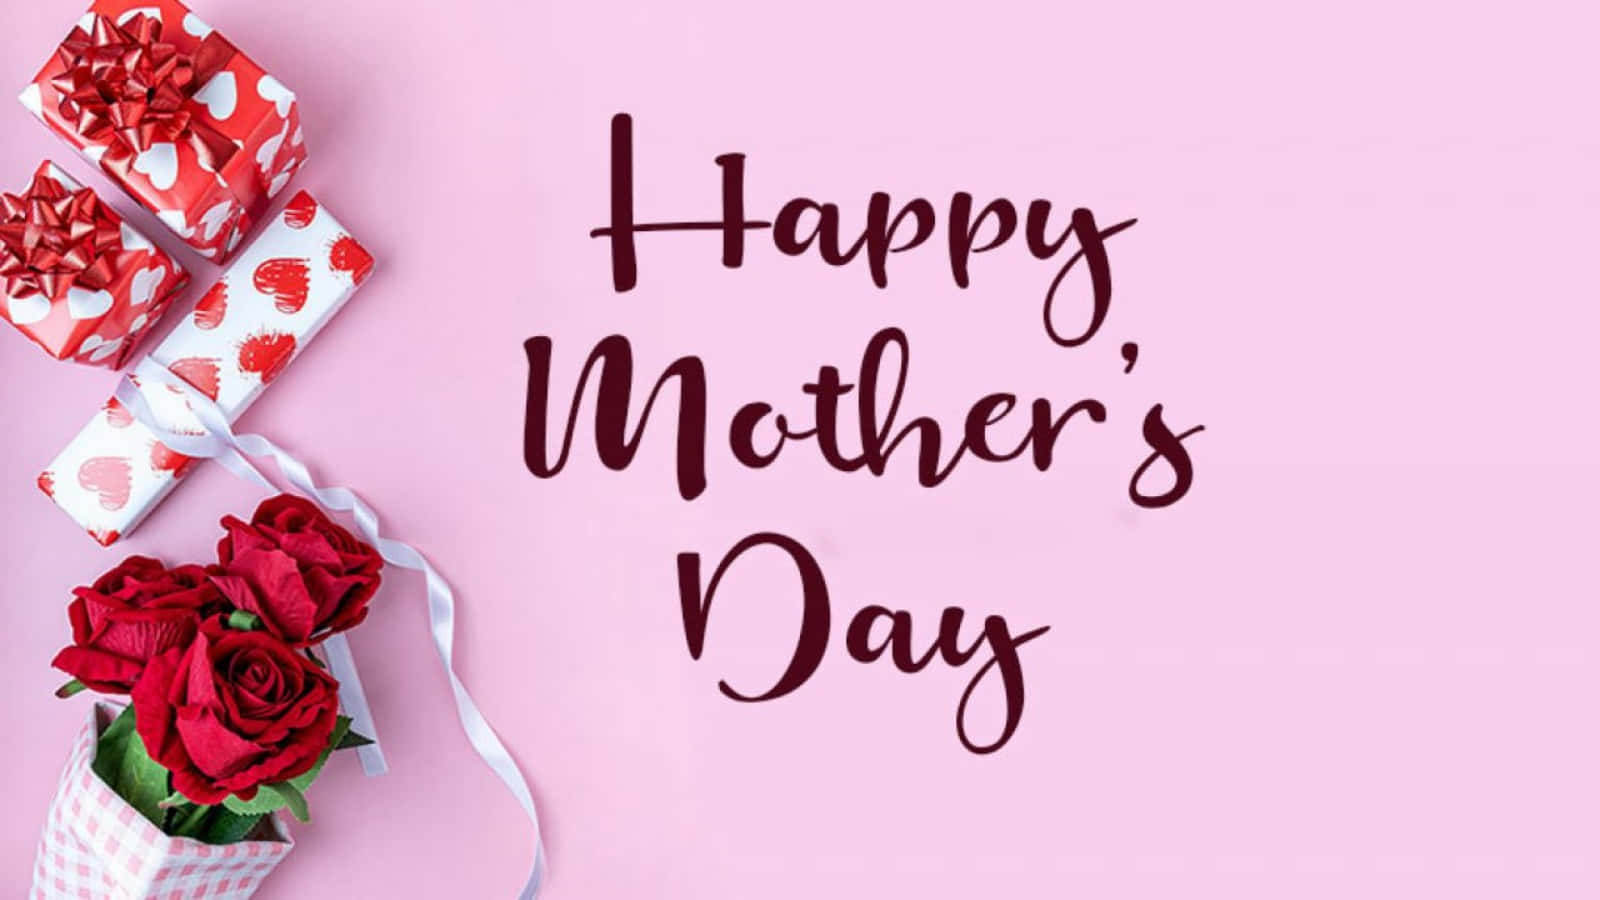 Celebrate the amazing moms in your life this Mothers Day